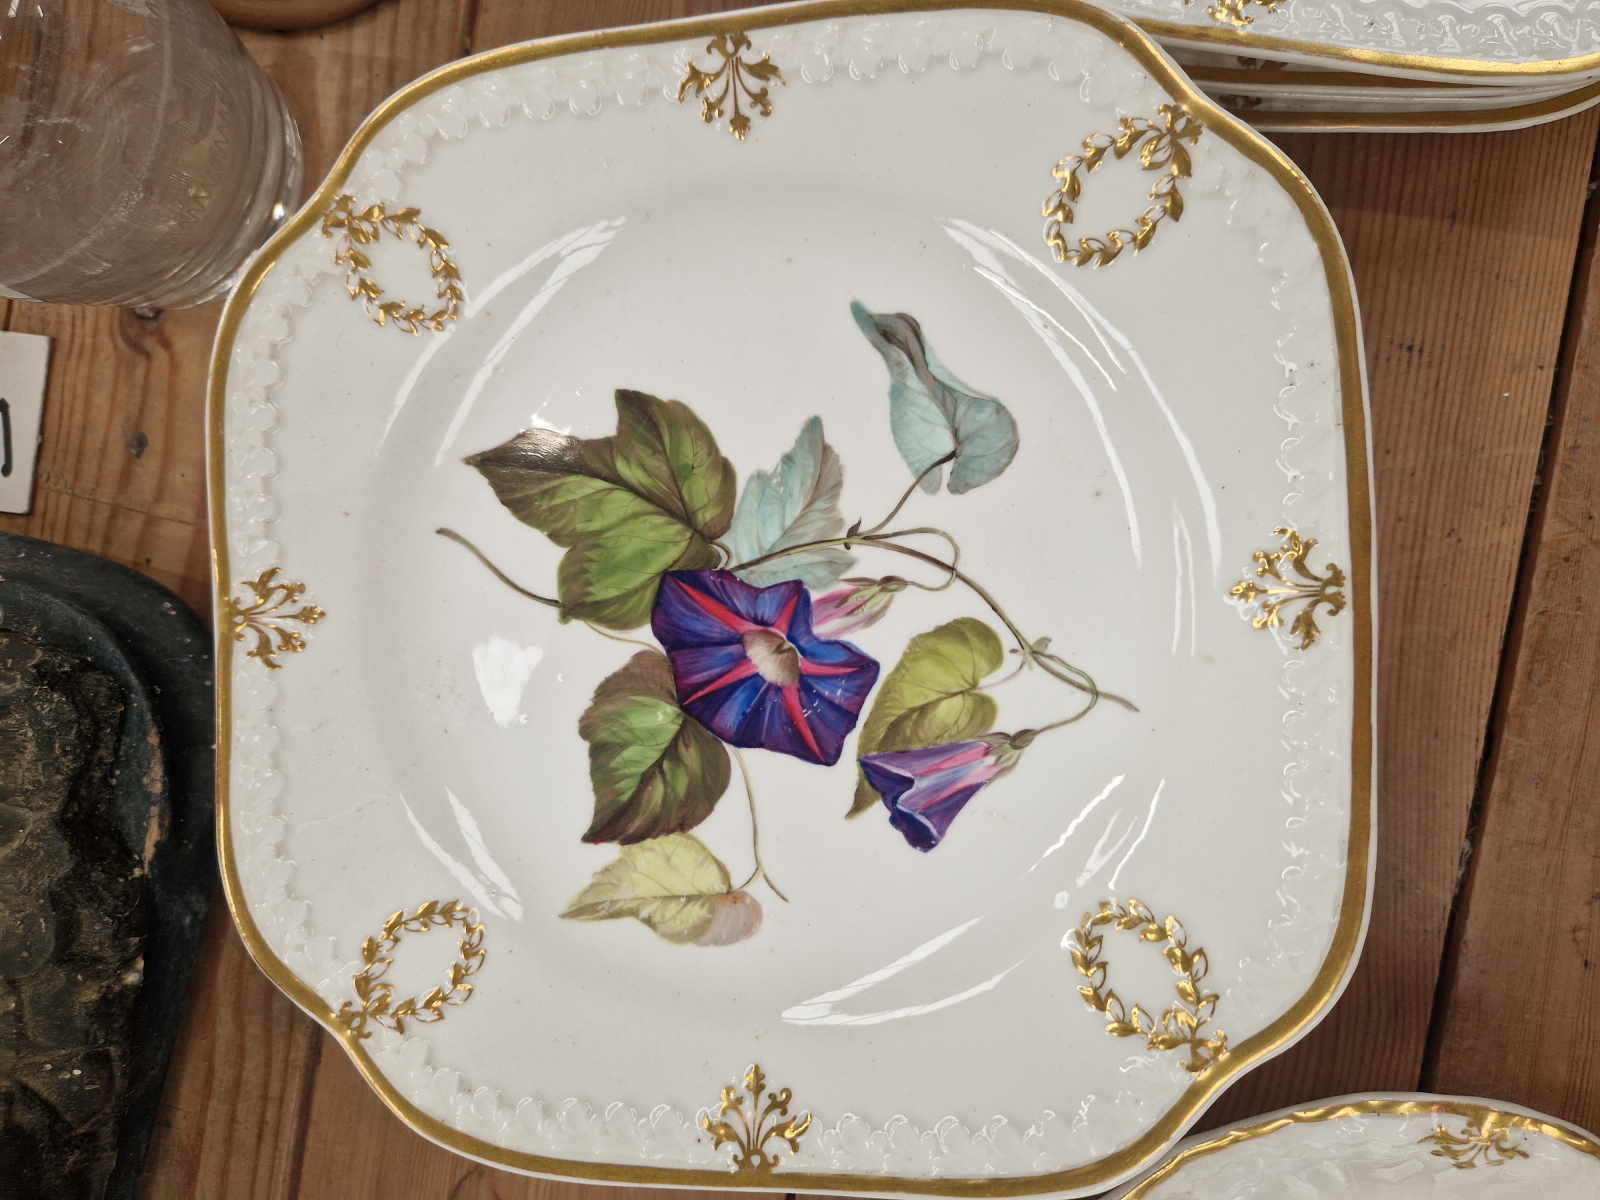 A FINE EARLY 19th C. PORCELAIN DESSERT SERVICE, HAND PAINTED WITH NAMED FLORAL BOTANICAL SPECIMENS - Image 25 of 58